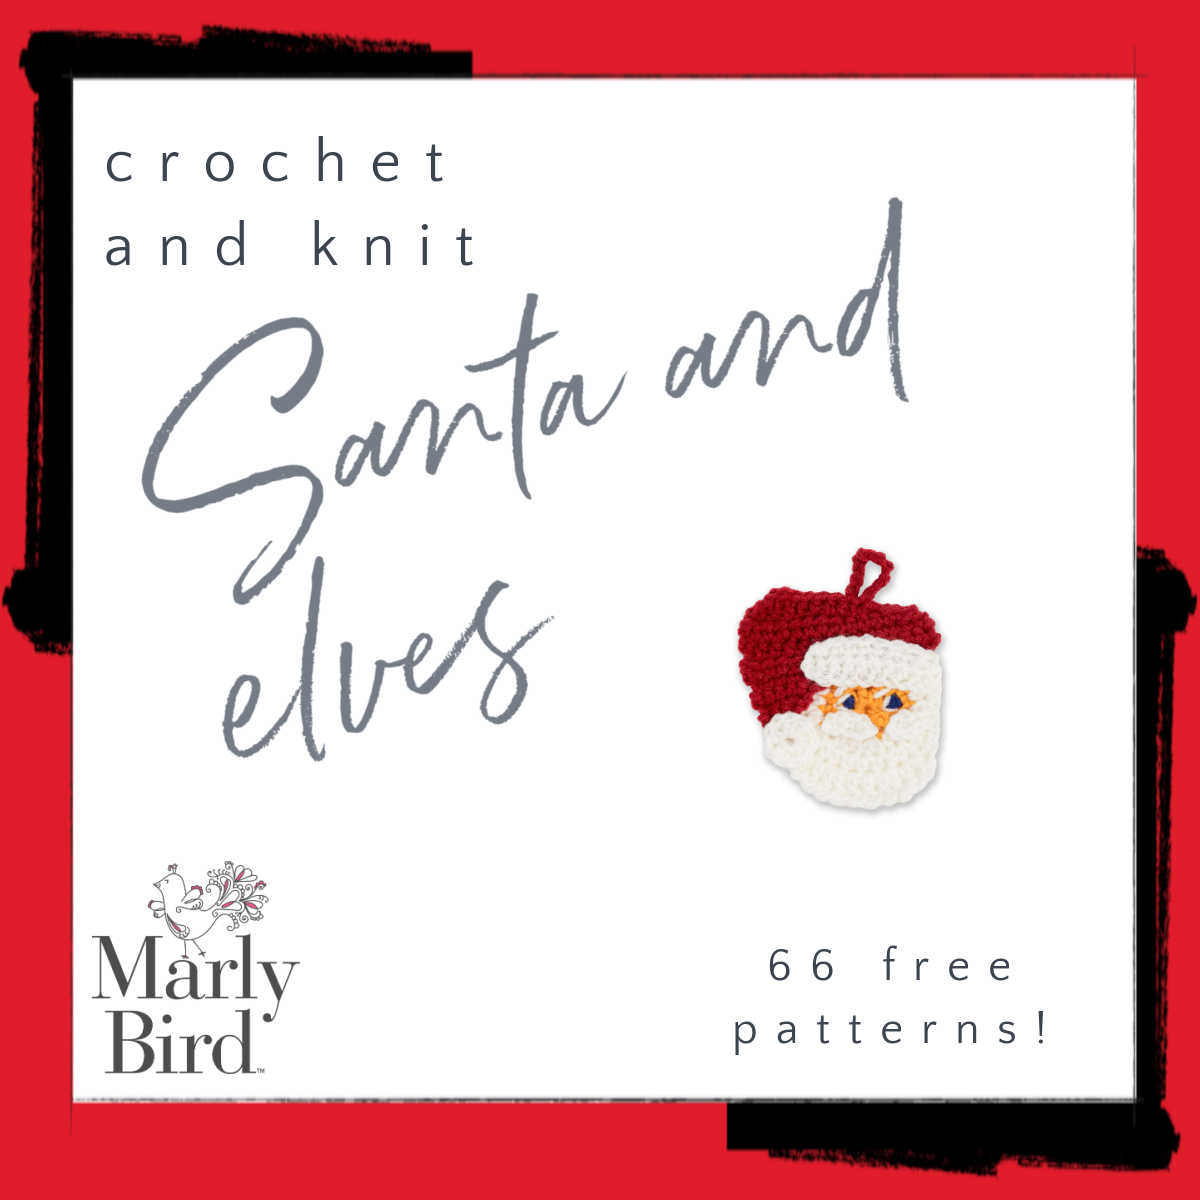 Promotional image featuring text "Knit and Crochet Santa Claus Patterns" by Marly Bird with an image of a Santa face crochet pattern and text "66 free patterns!" on a white background with red accents. -Marly Bird